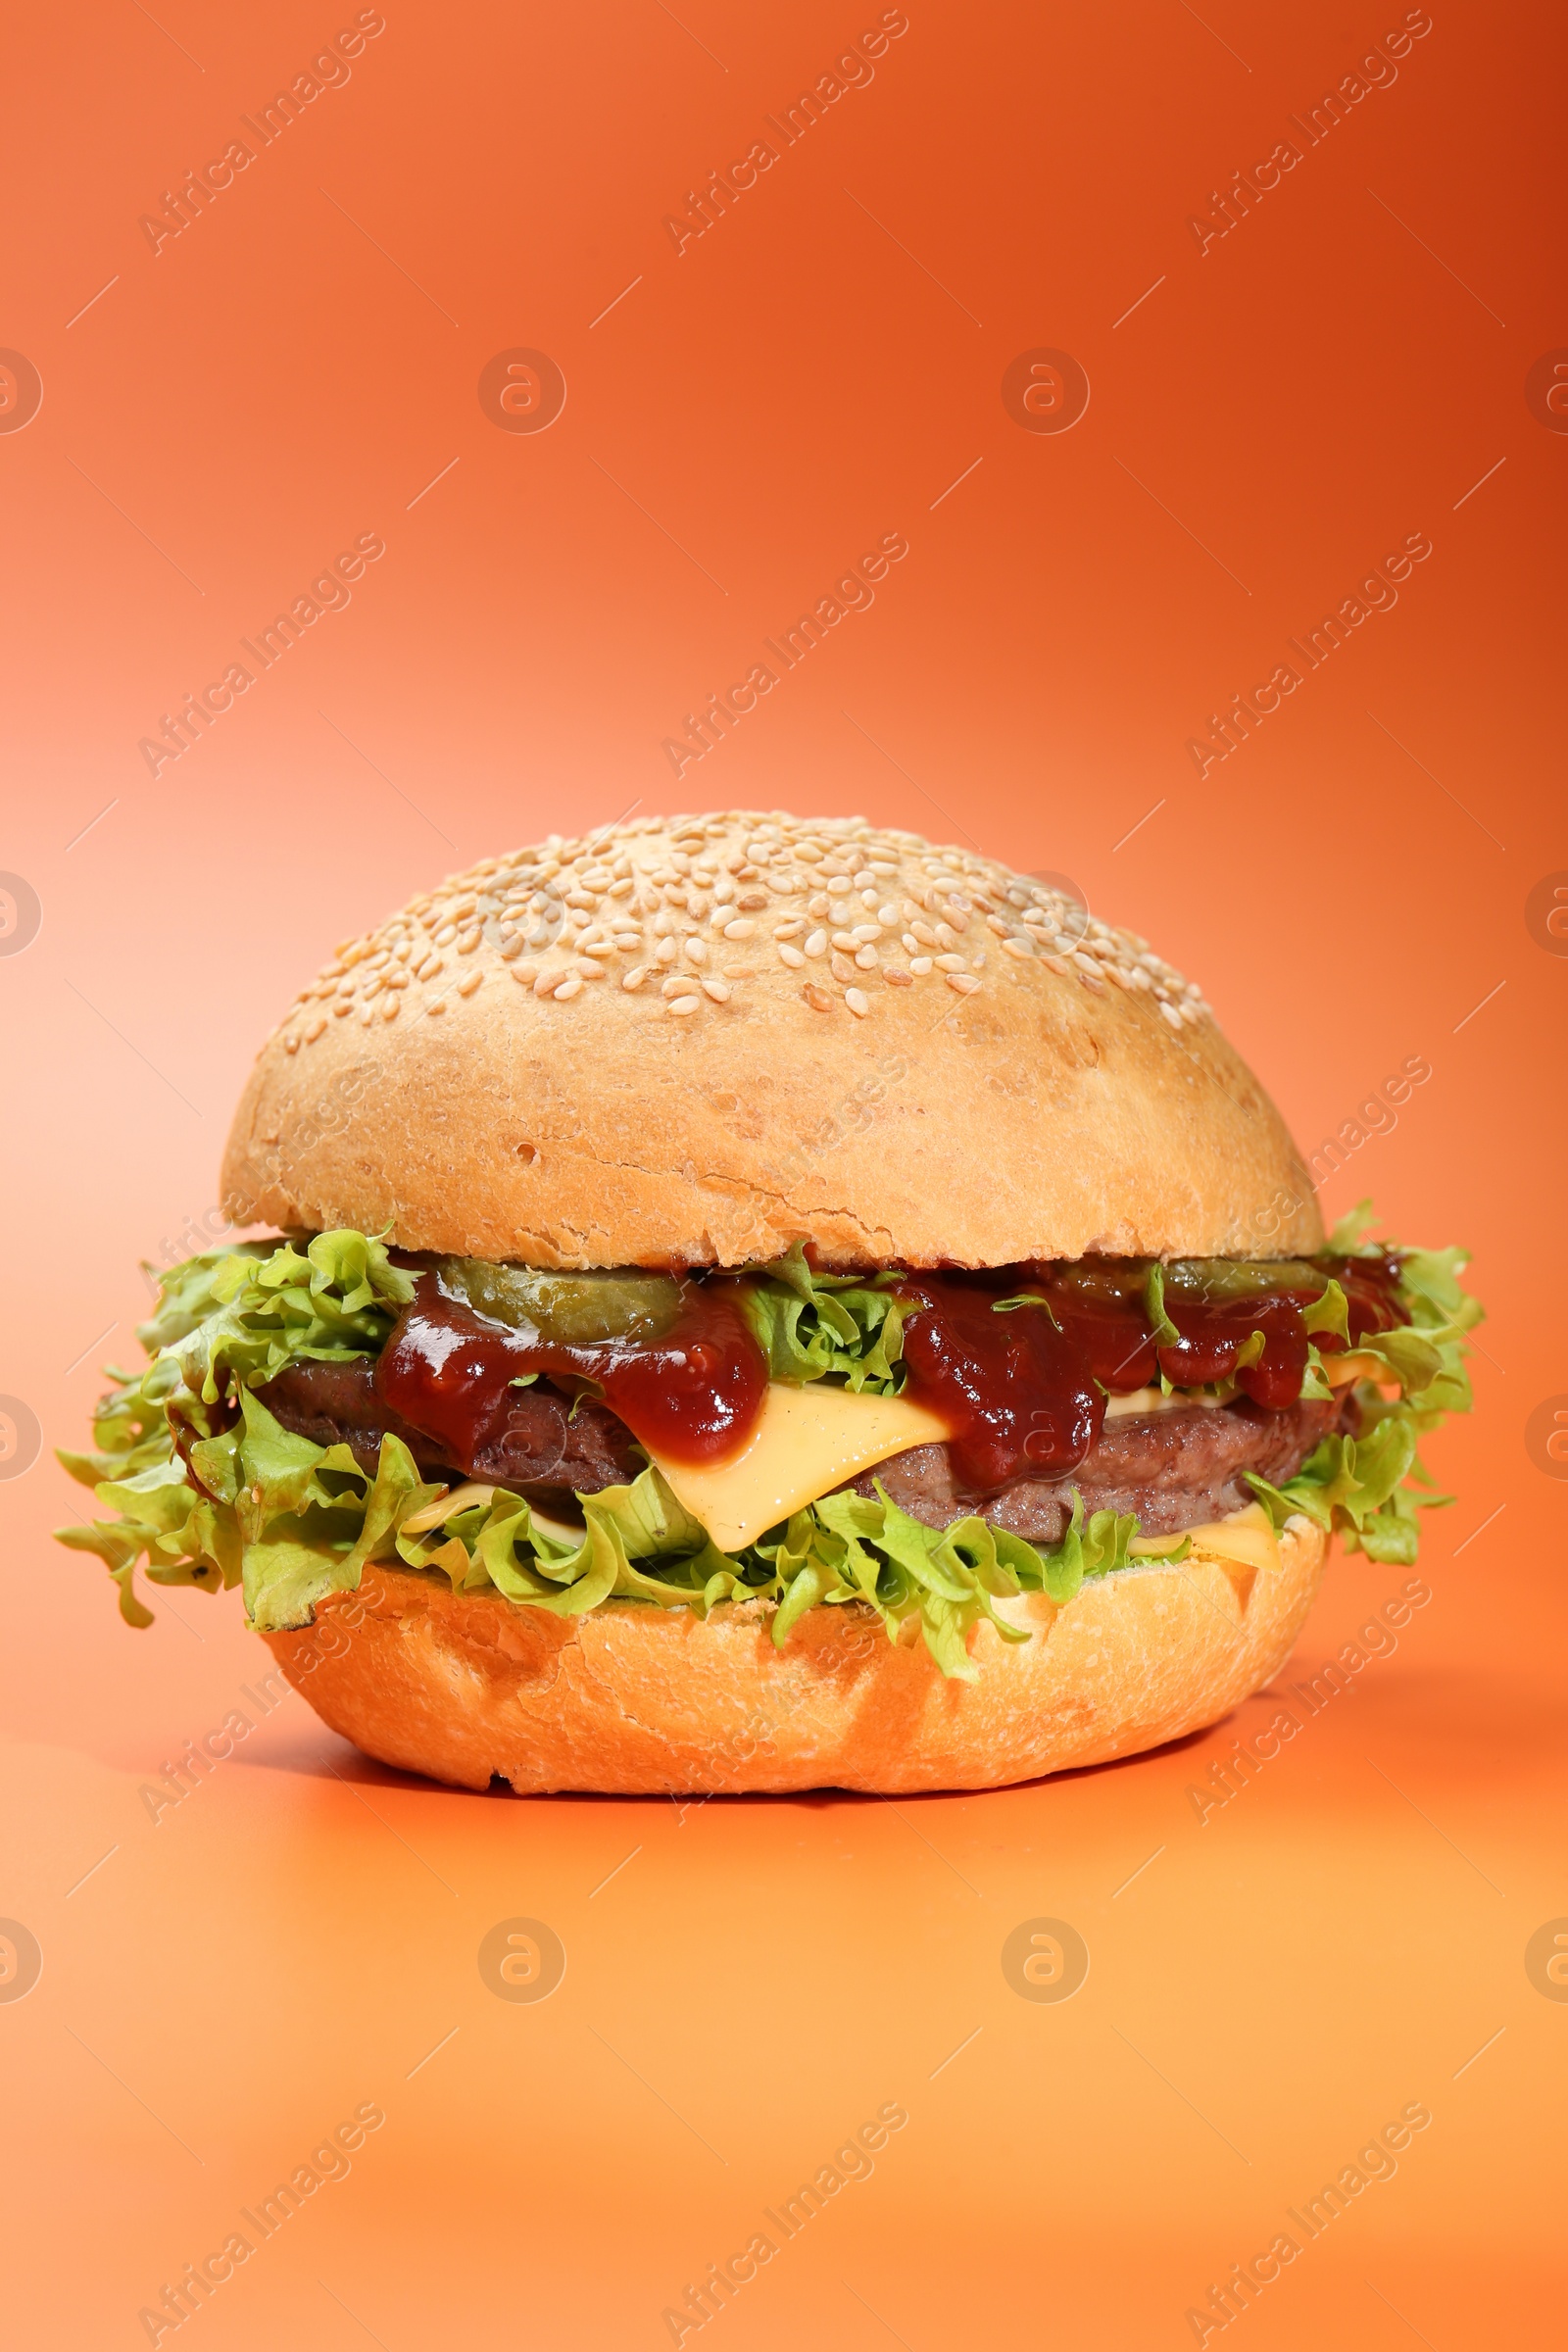 Photo of Delicious cheeseburger with lettuce, pickle, ketchup and patty on coral background